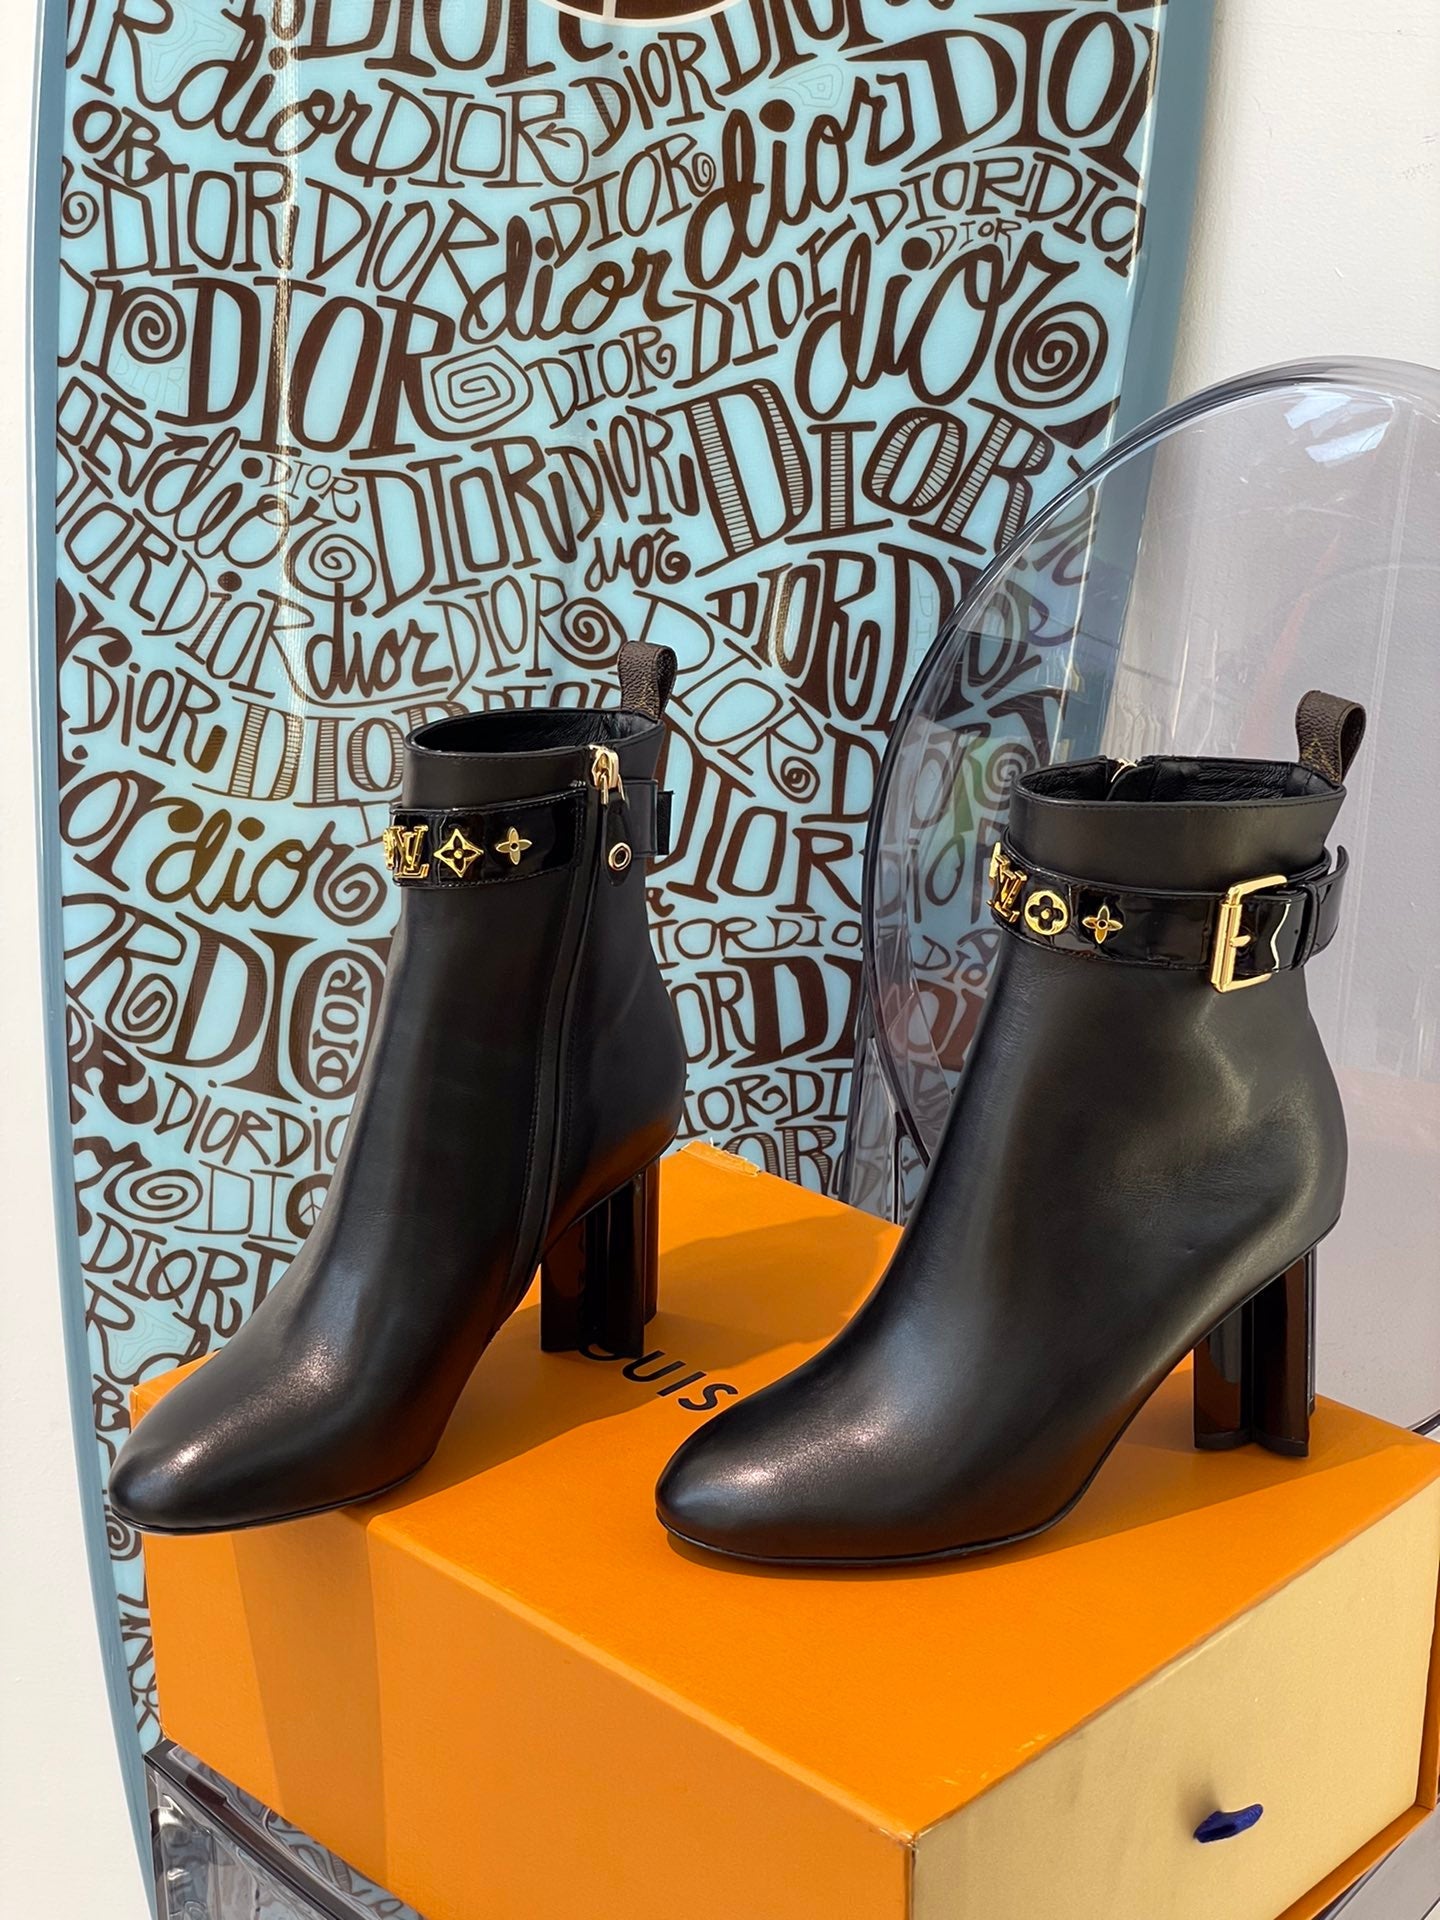 Louis Vuitton silhouette ankle boots/booties